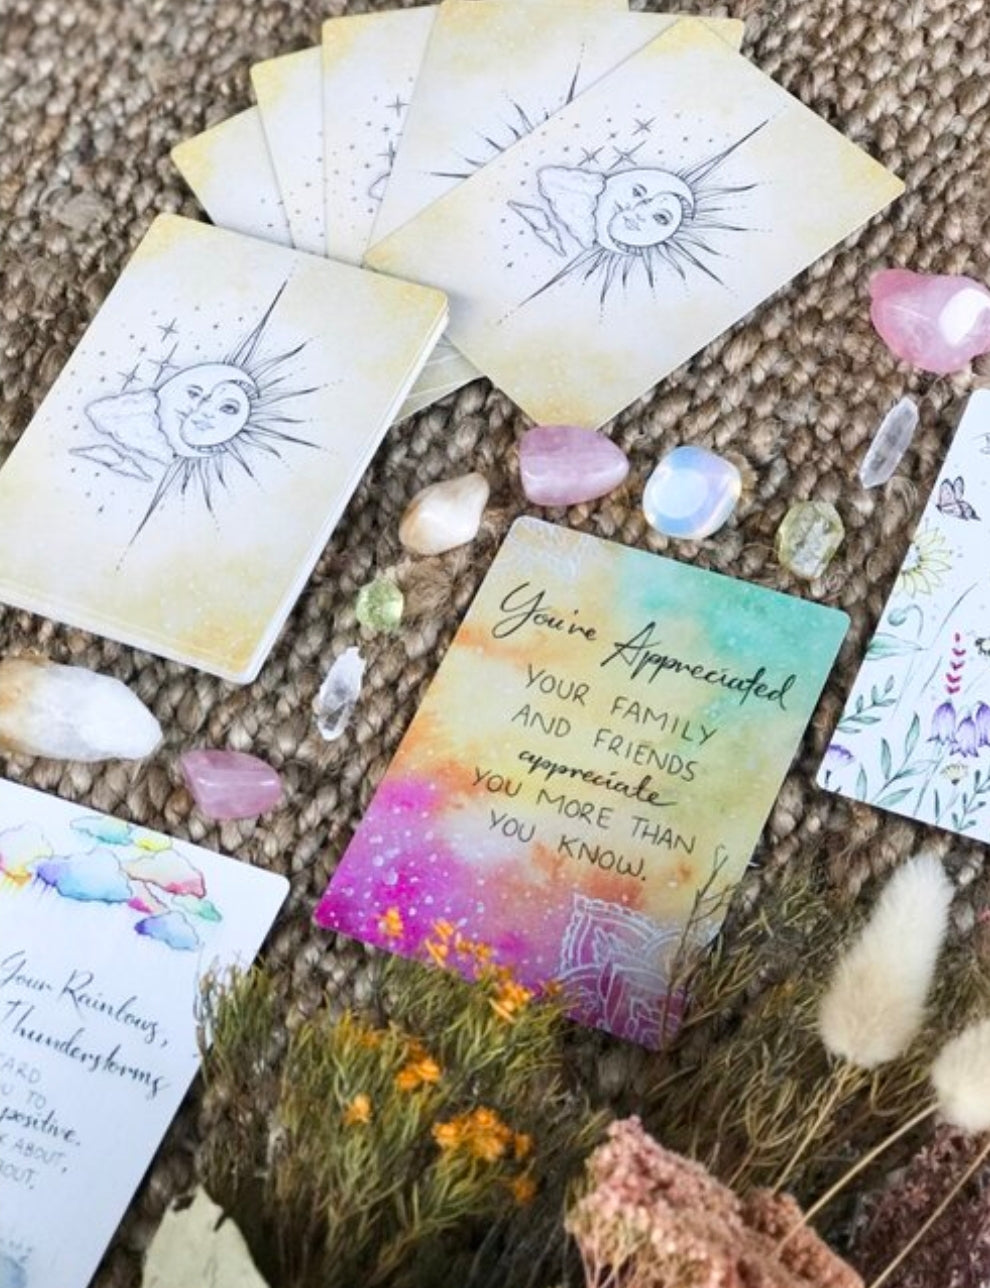 Pass Around The Smile Positive Guidance Cards